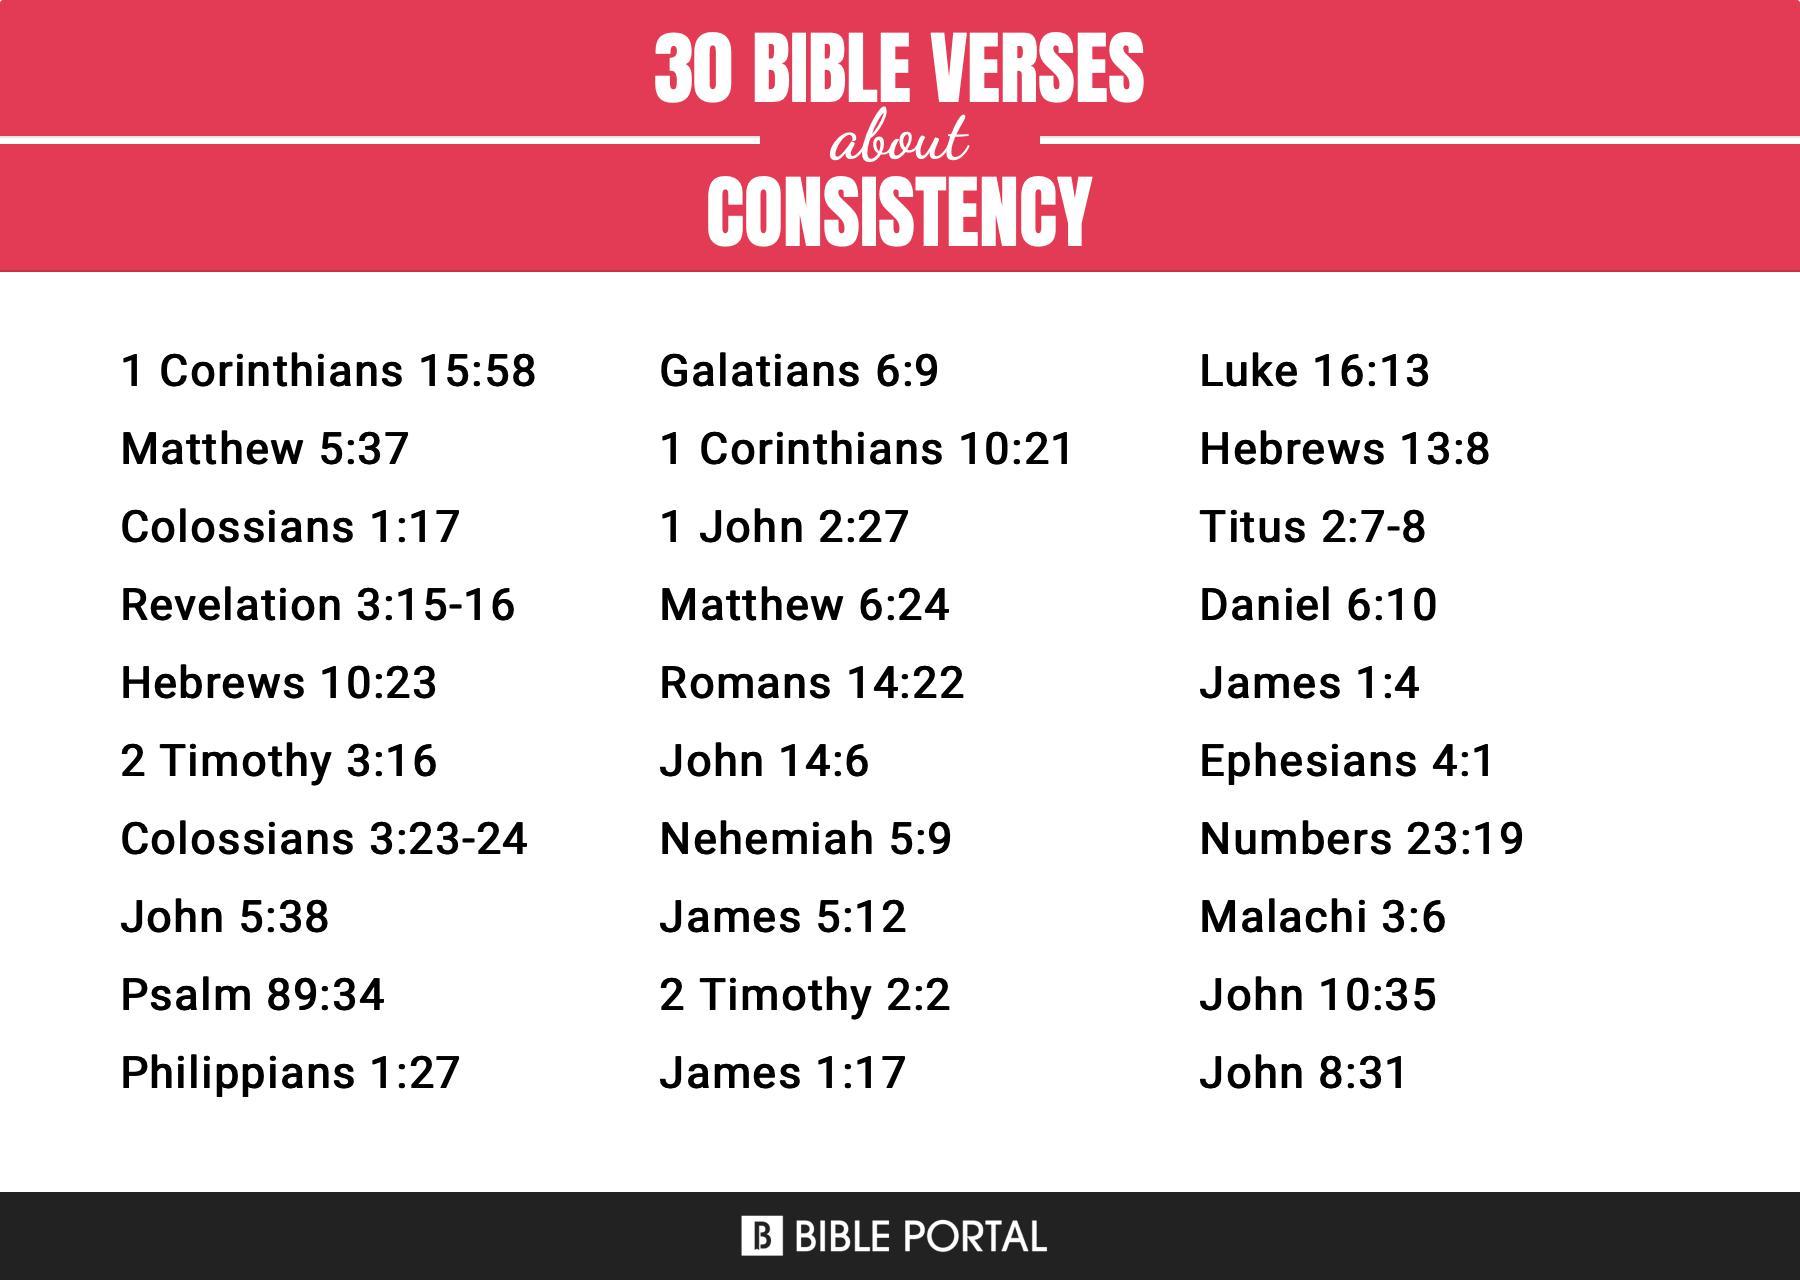 What Does the Bible Say about Consistency?